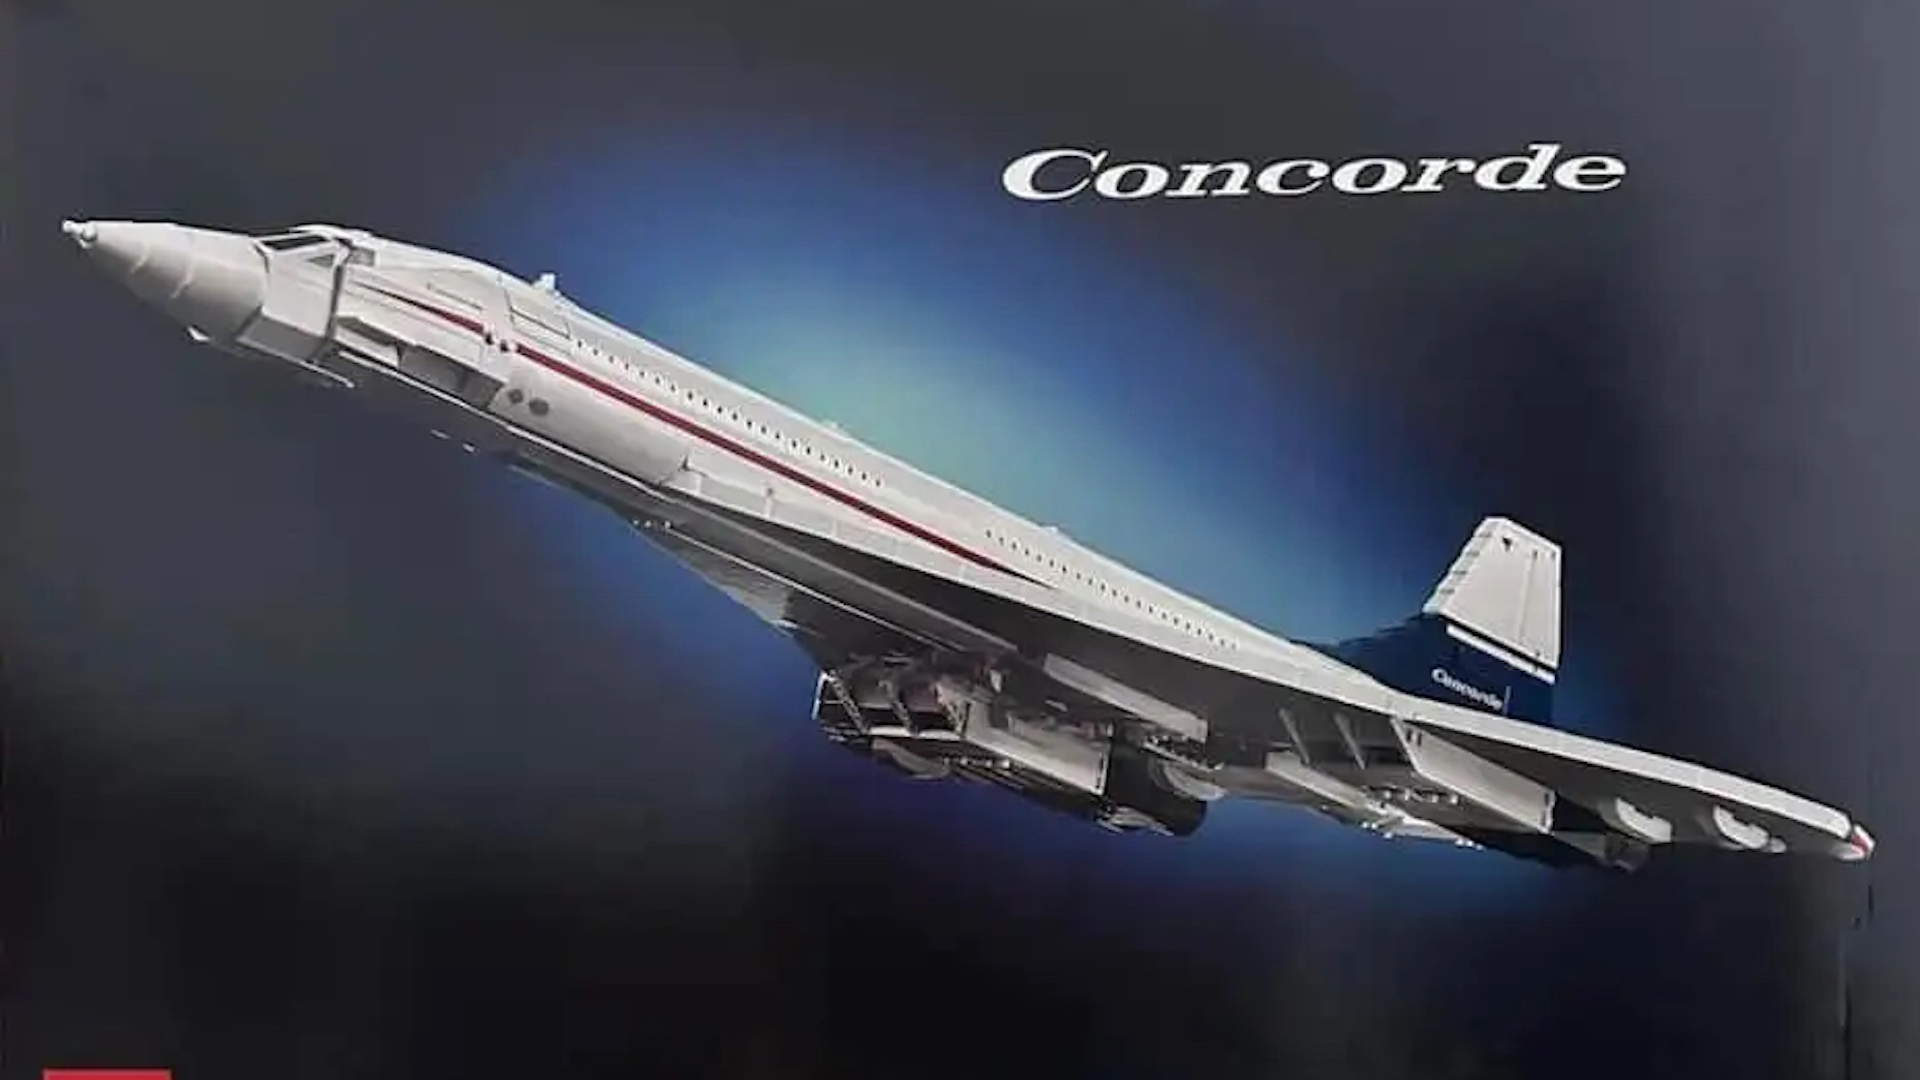 2,083-Piece Lego Concorde Set Will Eviscerate Your Wallet at Mach 2.04